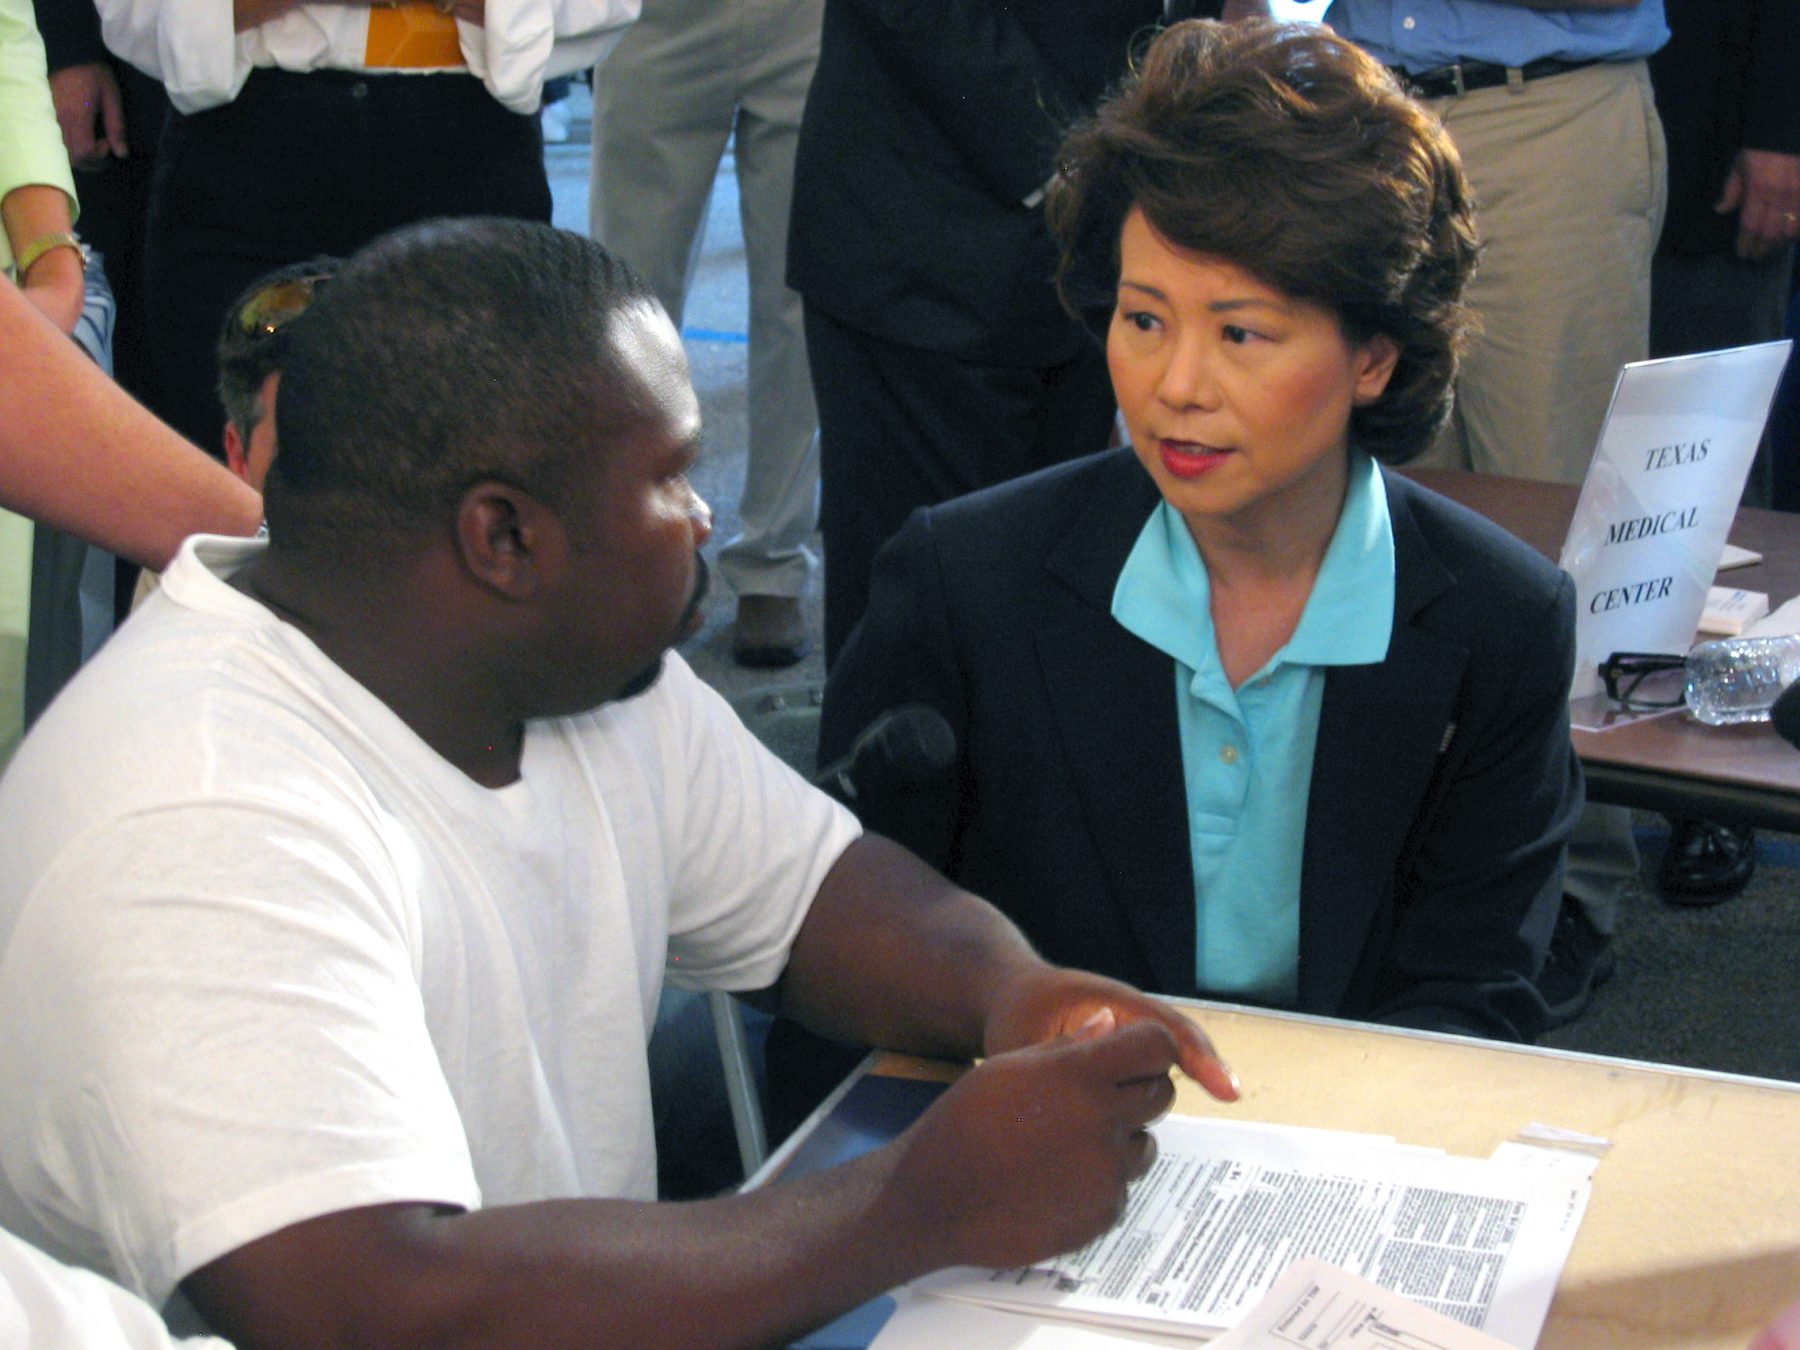 Secretary Elaine Chao talking to a displaced worker at an employment center in the gulf region after Hurricane Katrina.